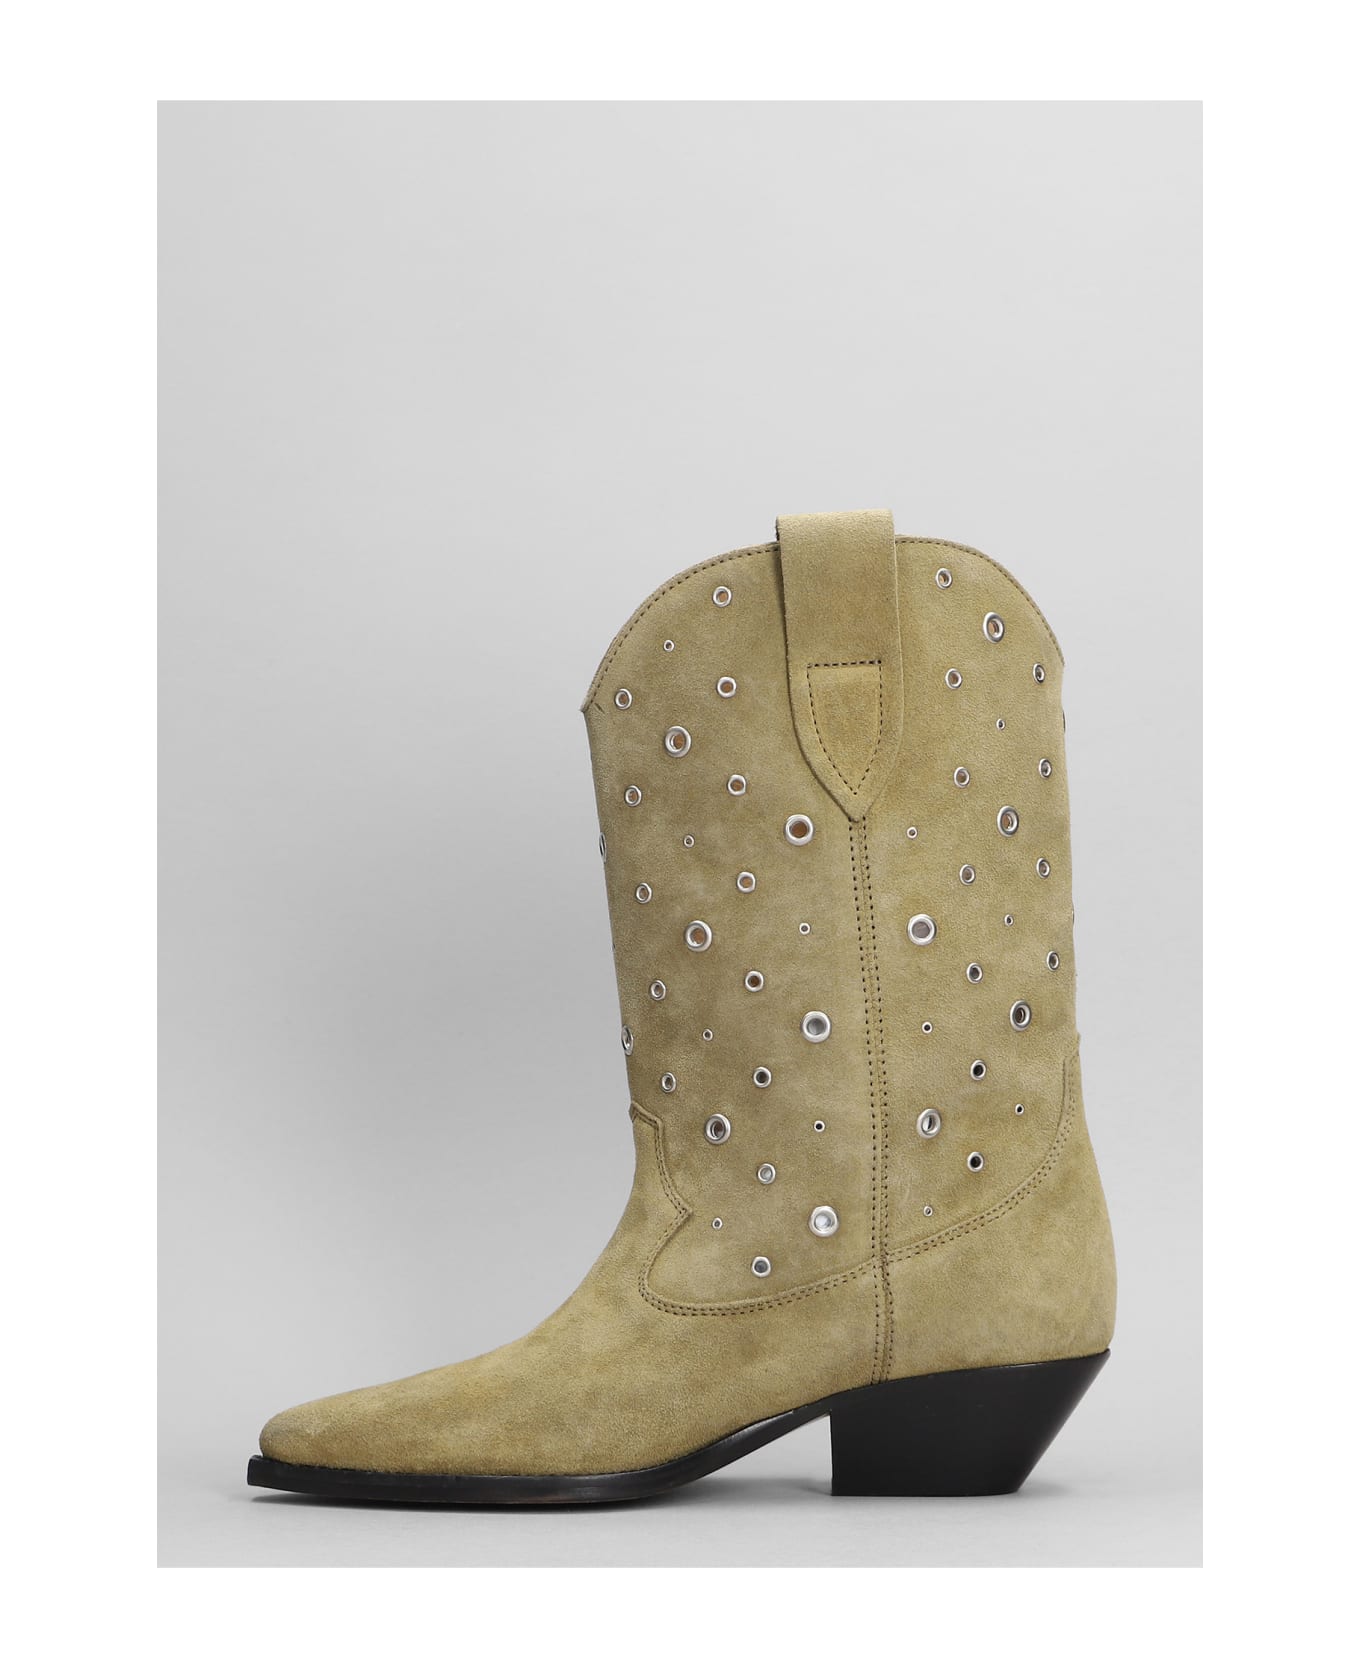 Isabel Marant Western Boots With Studs In Suede - Beige ブーツ